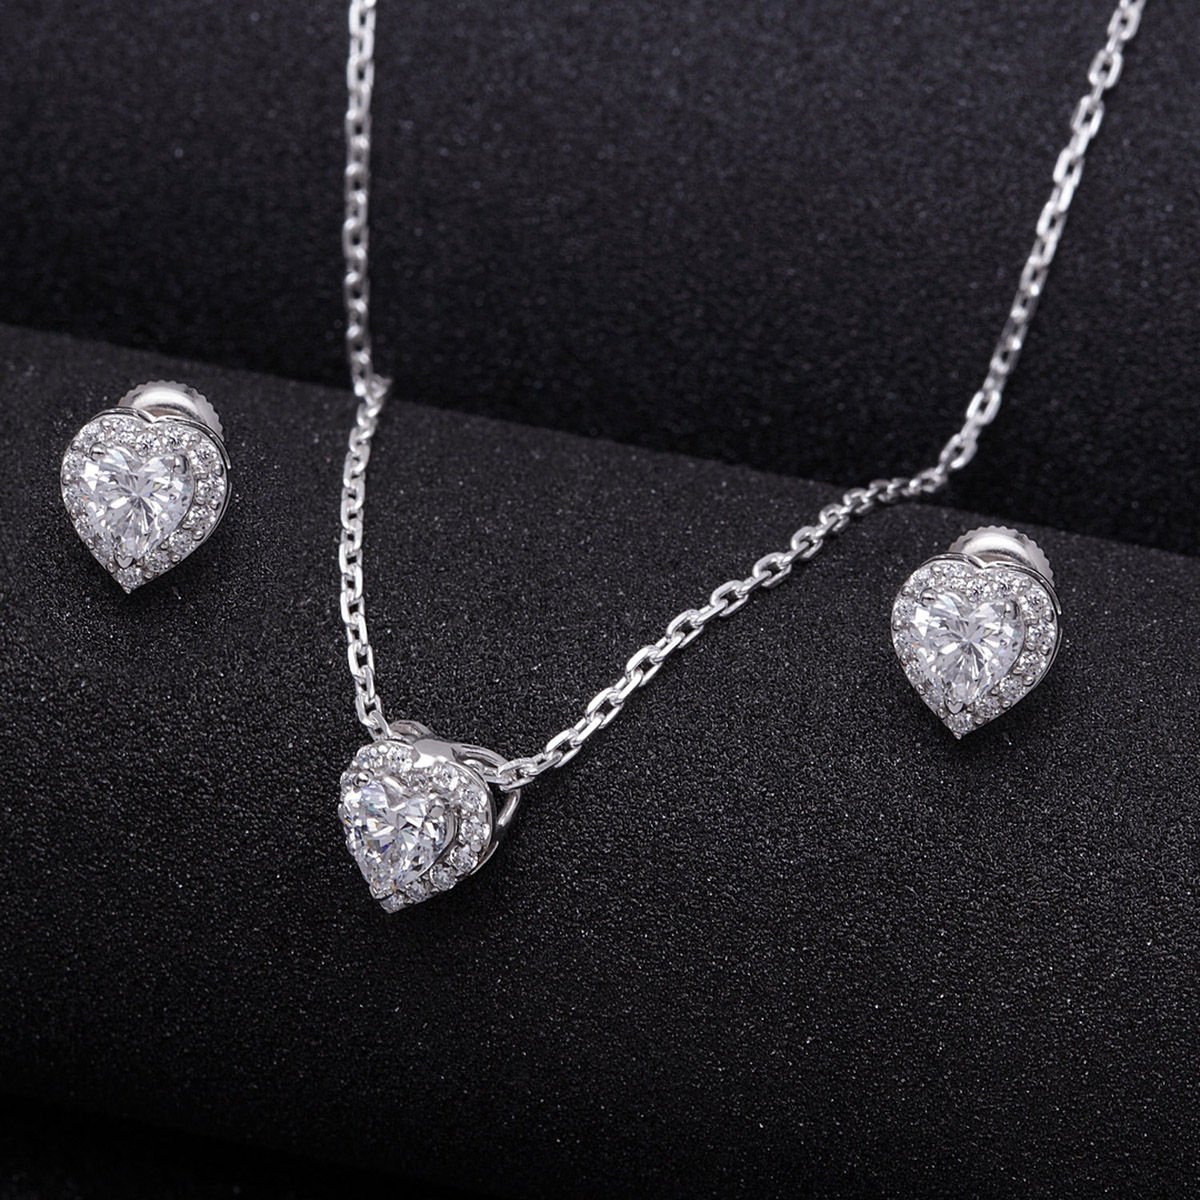 Fashion Jewelry Collection Sterling Silver Round CZ Center Accented  Engagement Ring and Pendant and Earrings Set CNY-K-7846-SET - D&D Jewelry  in Walnut Creek CA